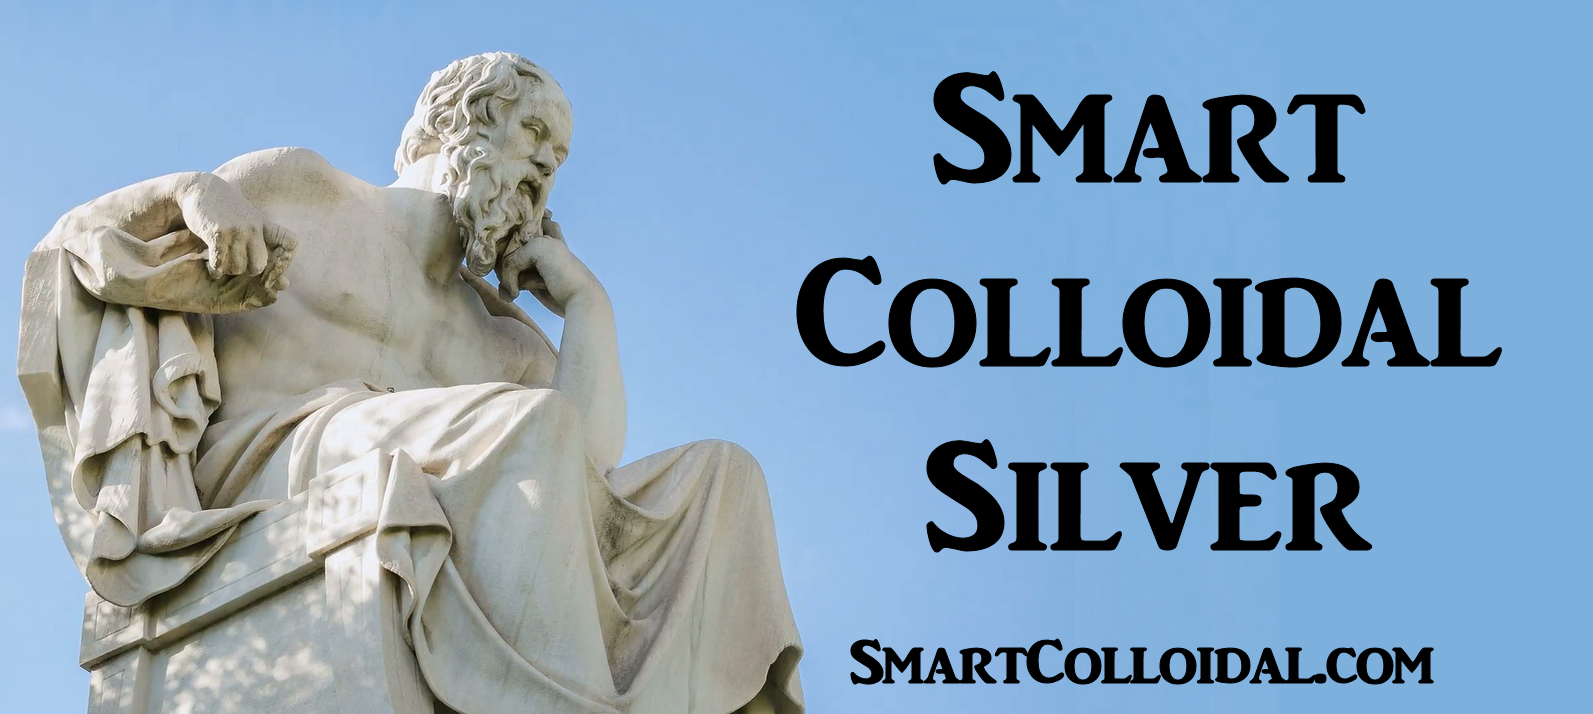 Socrates thinking about Smart Colloidal Silver